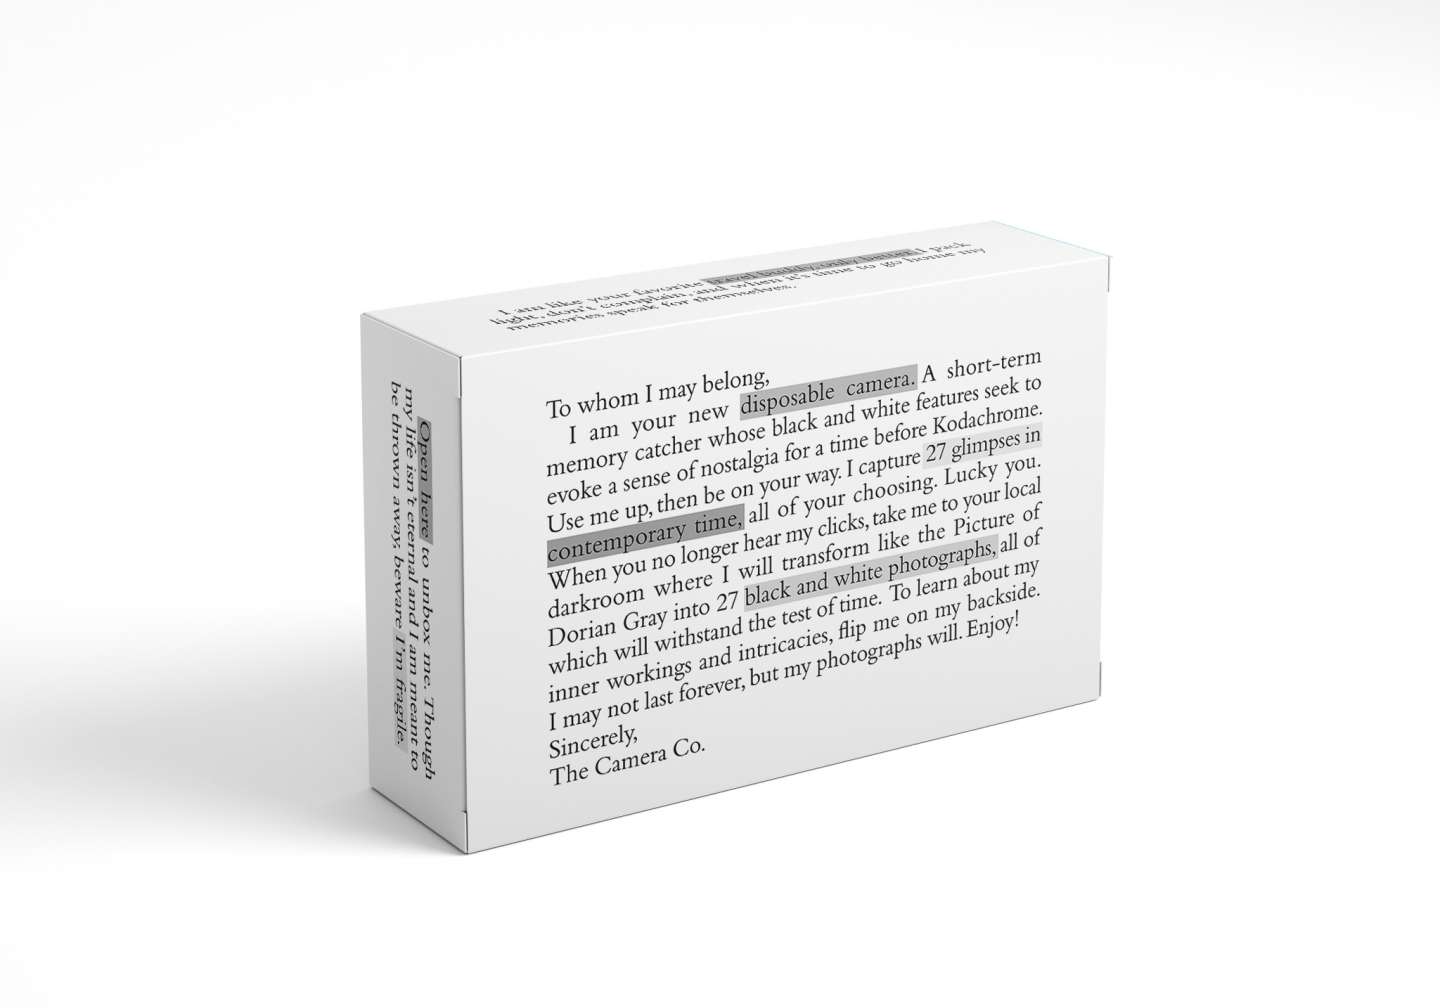 The Camera Co.: Packaging